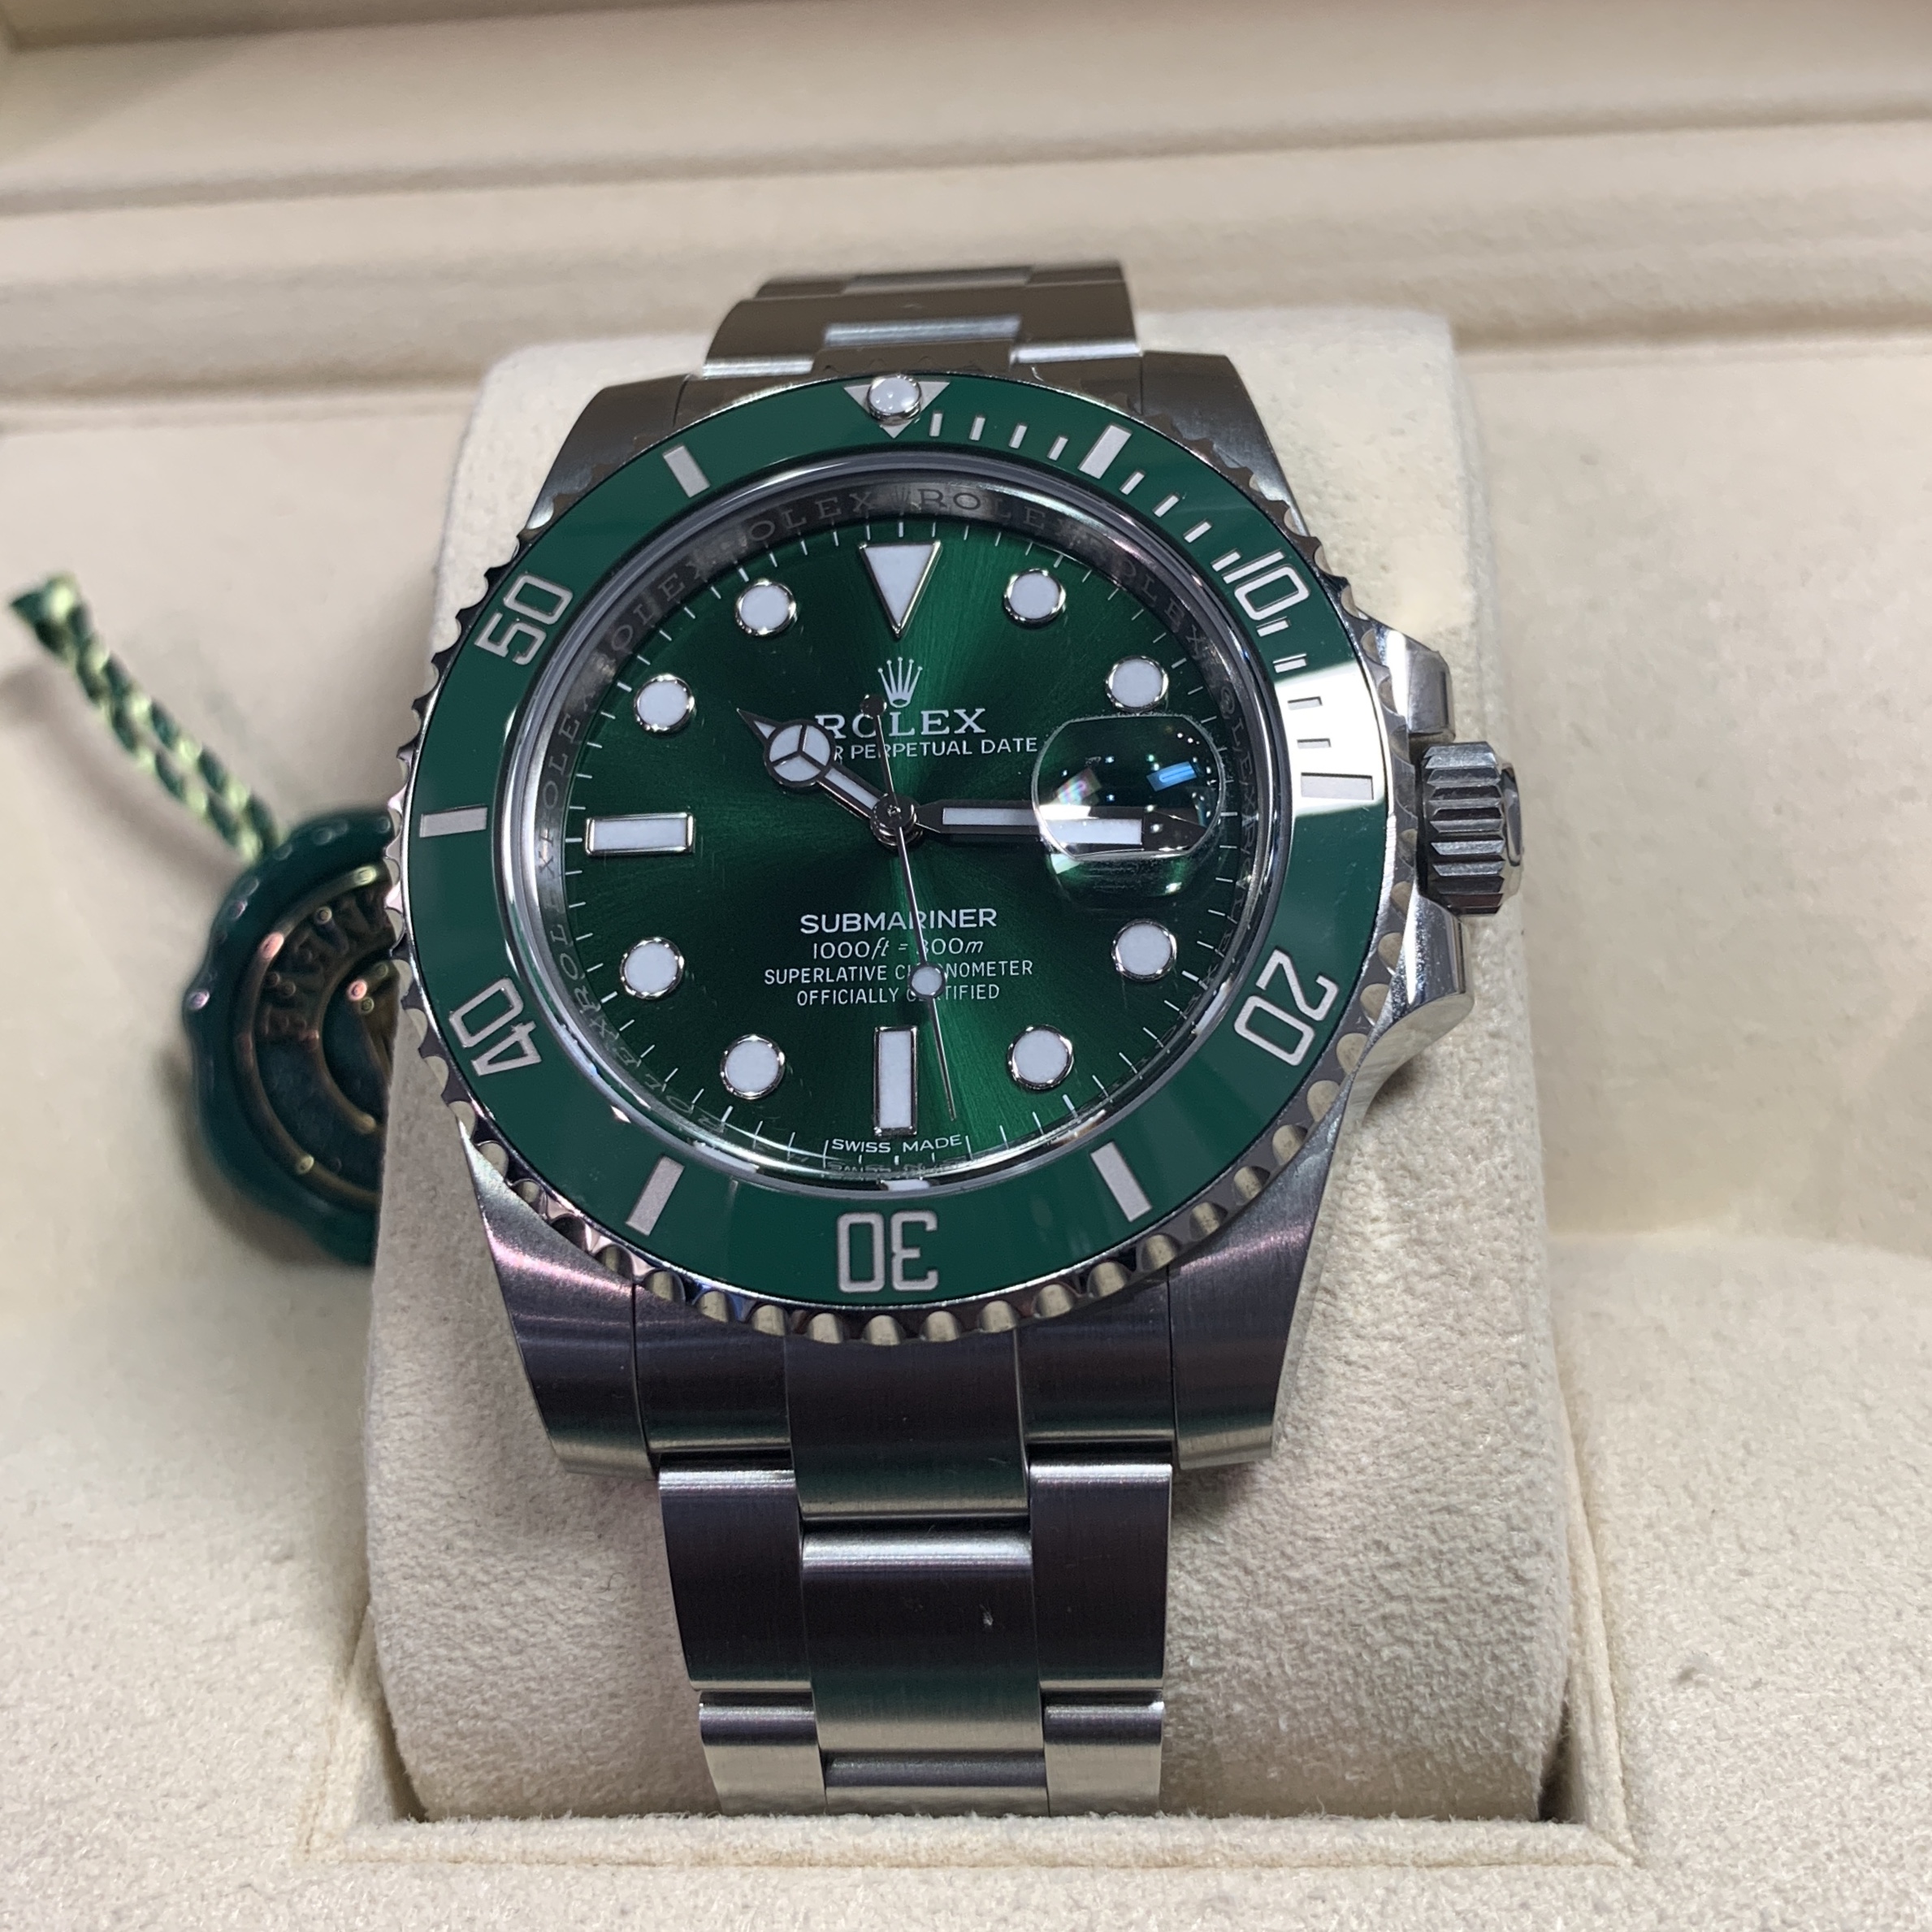 Rolex Submariner Hulk Price - How do you Price a Switches?